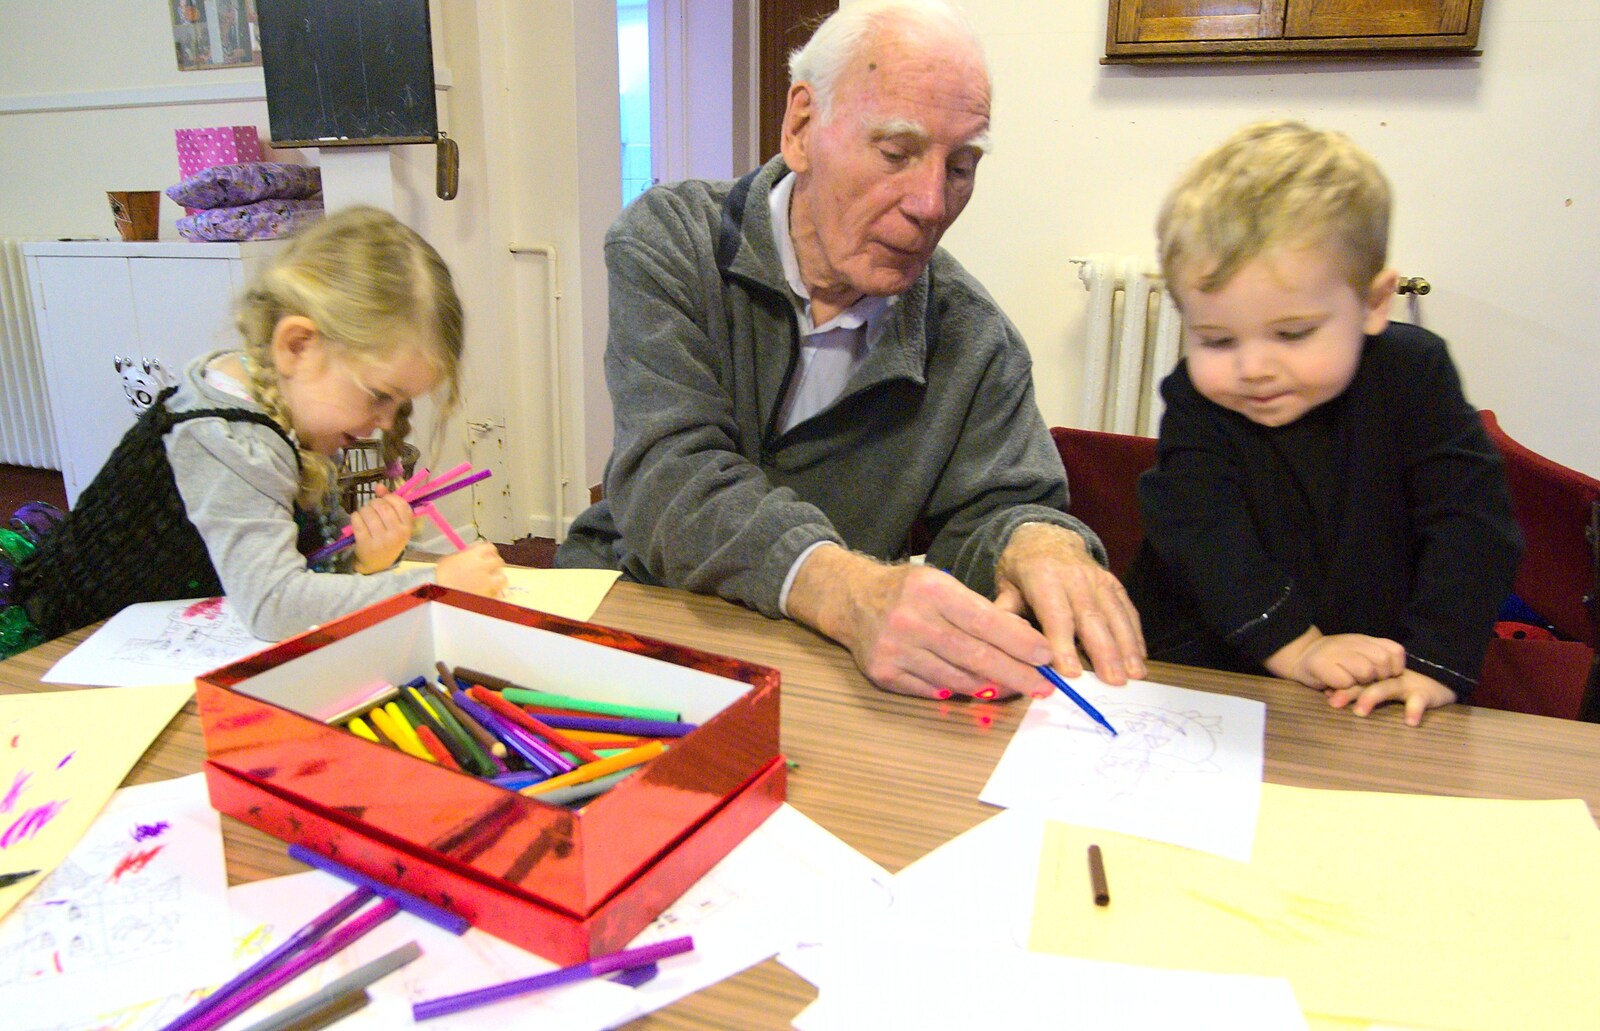 Amelia's grandad helps with some drawing from Amelia's Birthday, Brome Village Hall, Suffolk - 29th October 2011